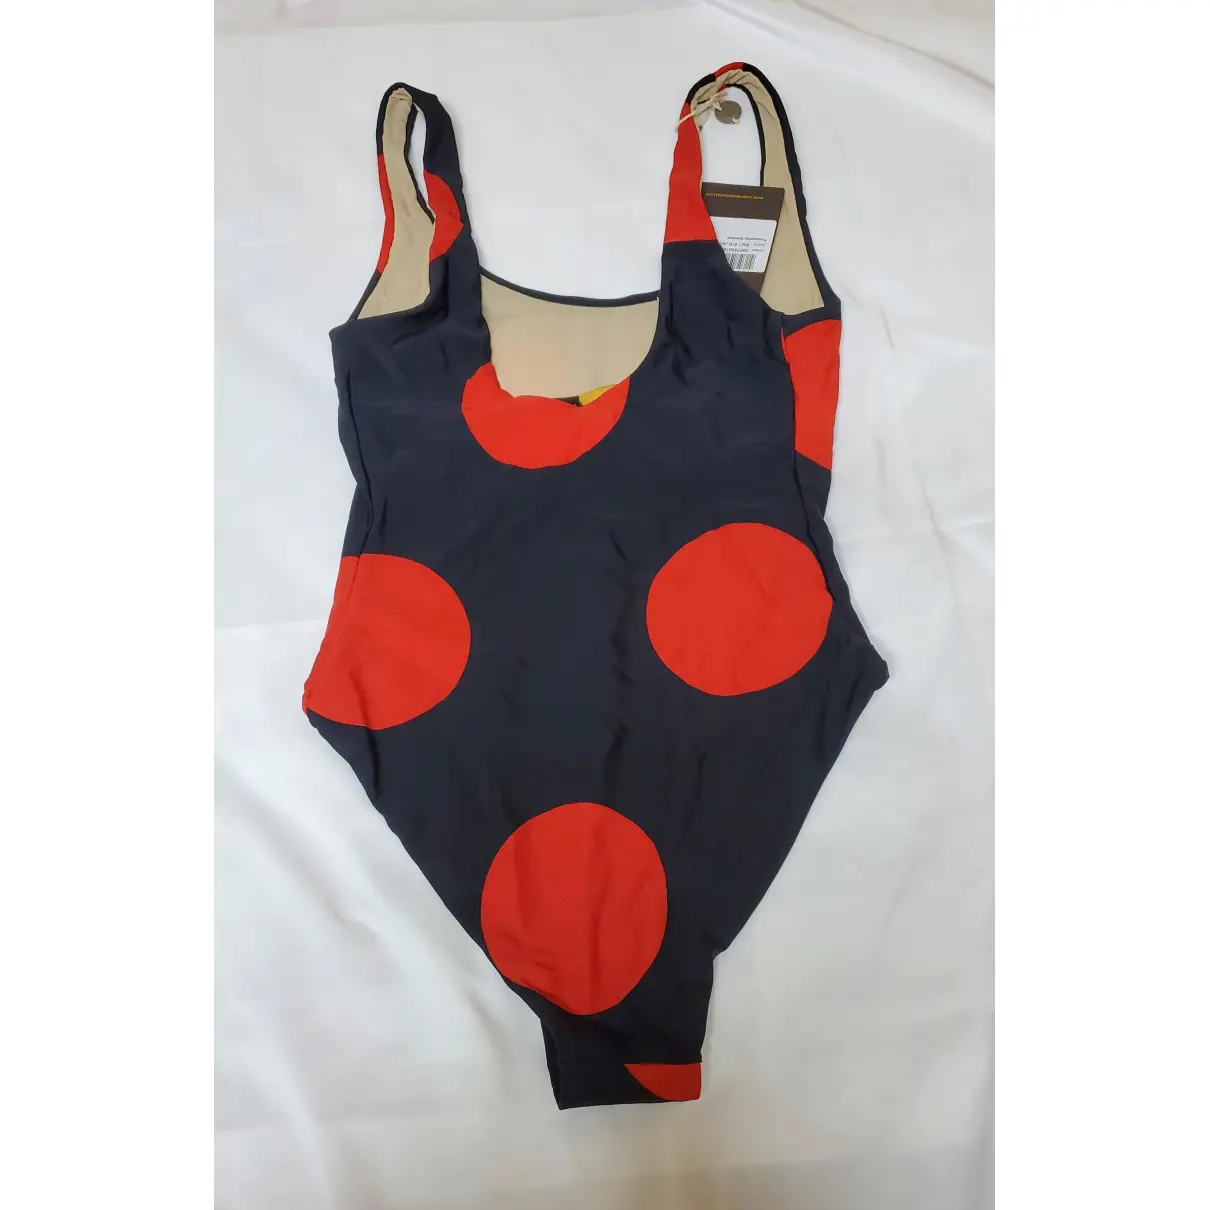 Buy Vivienne Westwood Anglomania One-piece swimsuit online